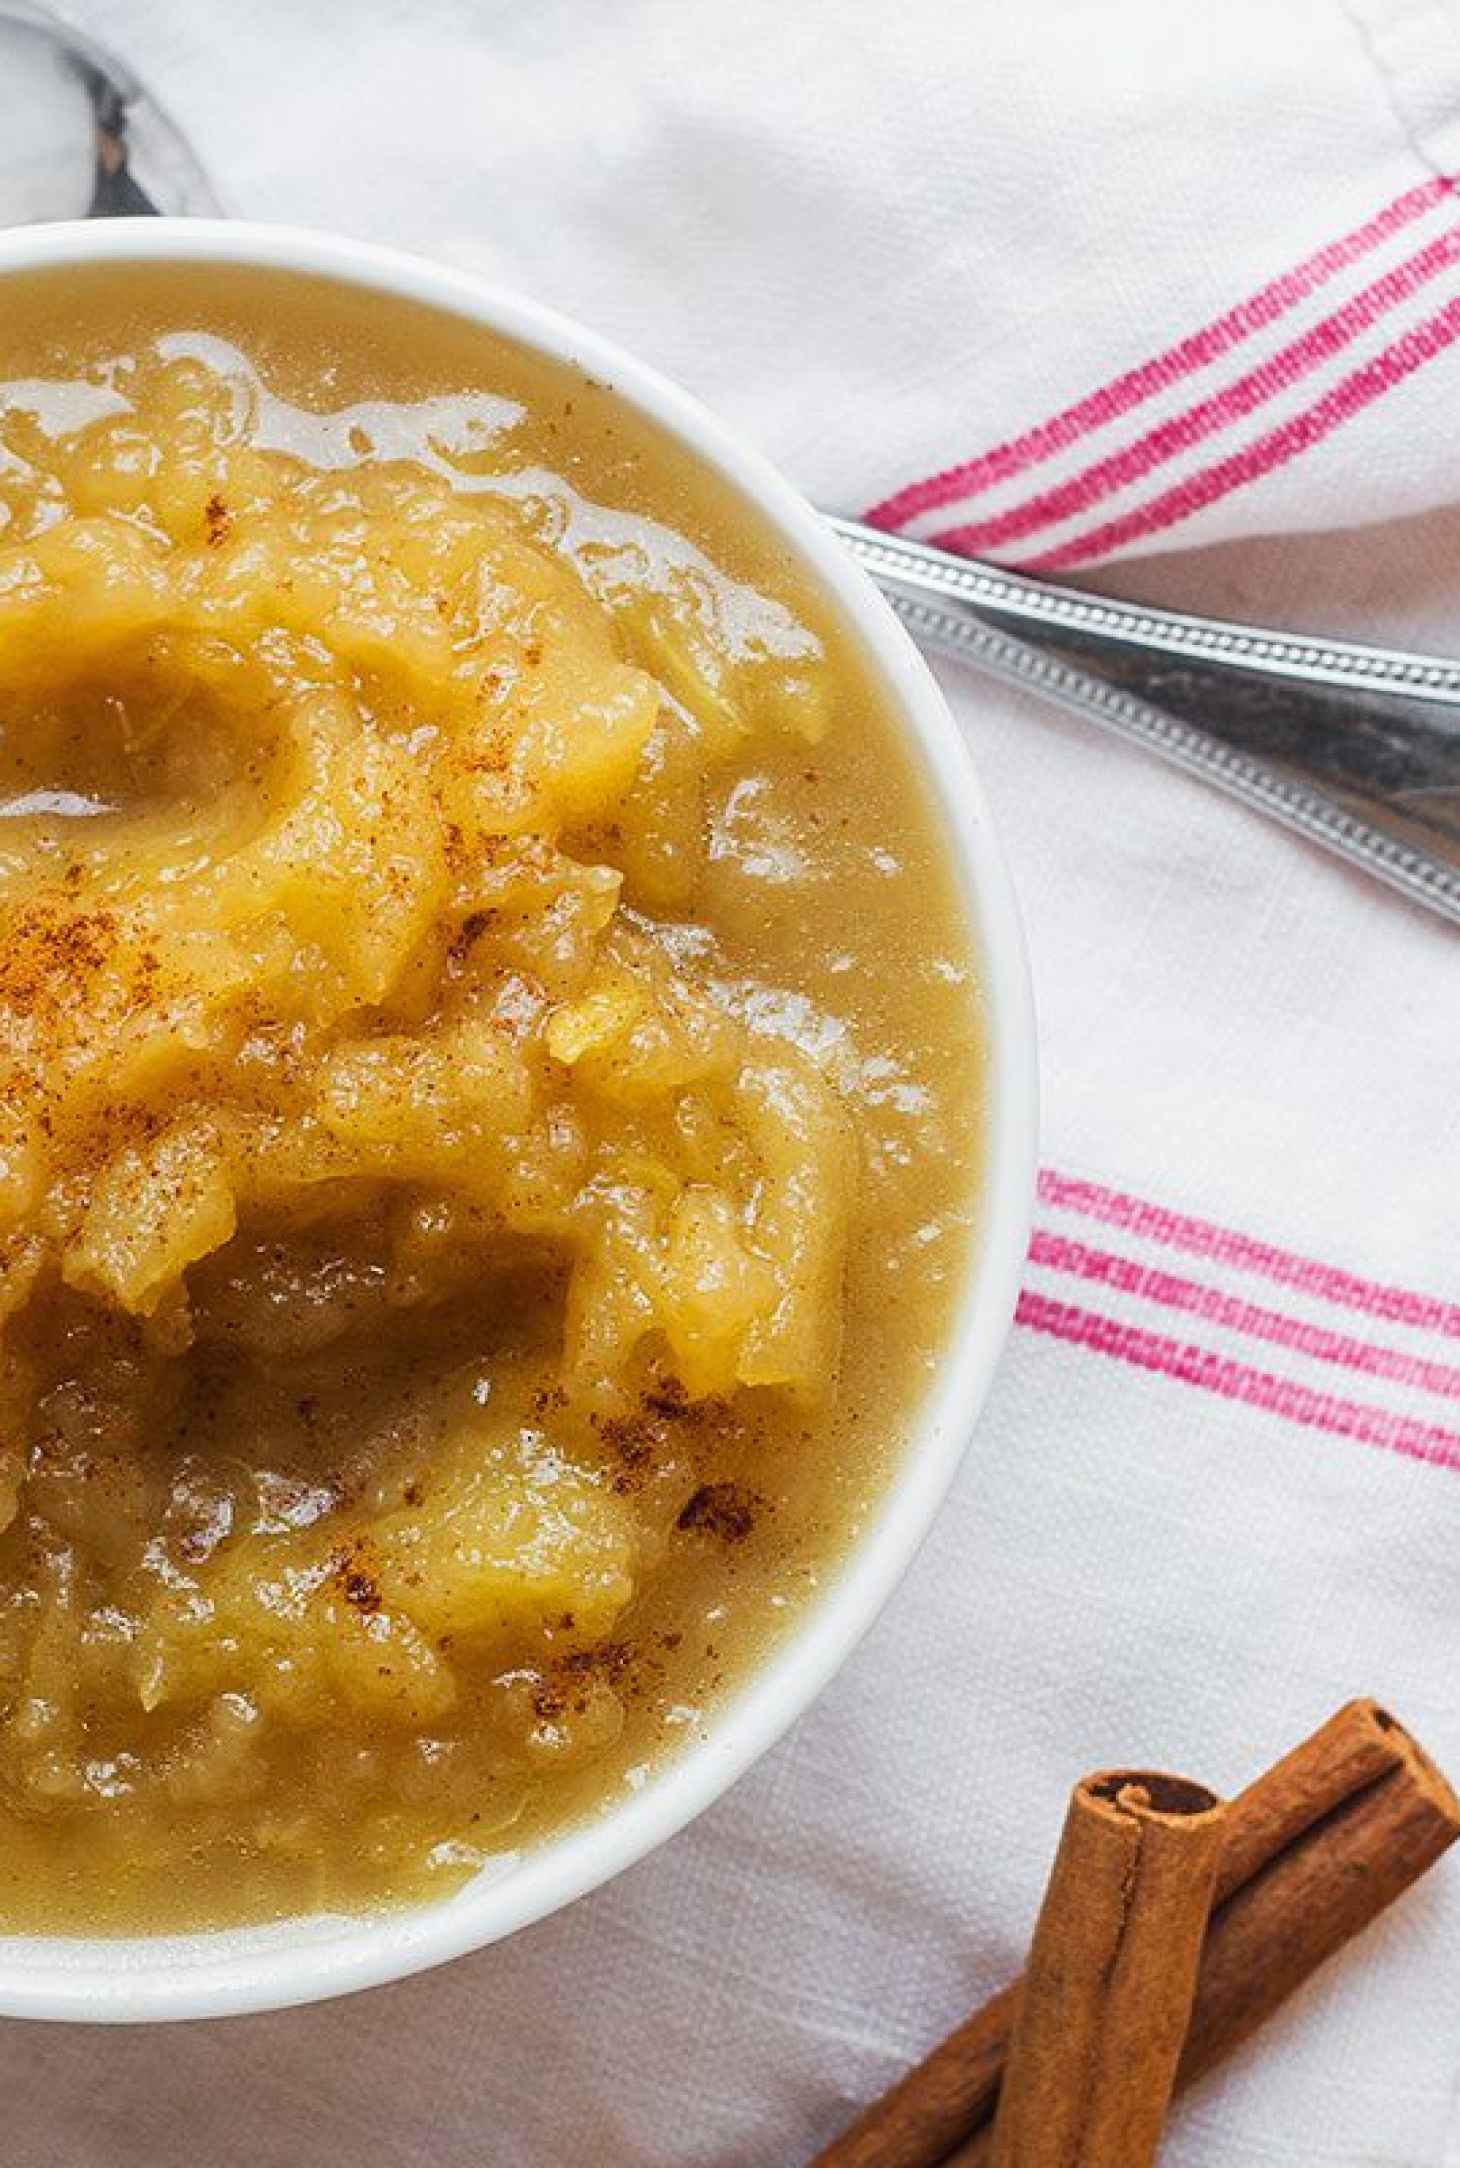 Instant Pot Applesauce - #recipe by #eatwell101 - https://www.eatwell101.com/instant-pot-applesauce-recipe